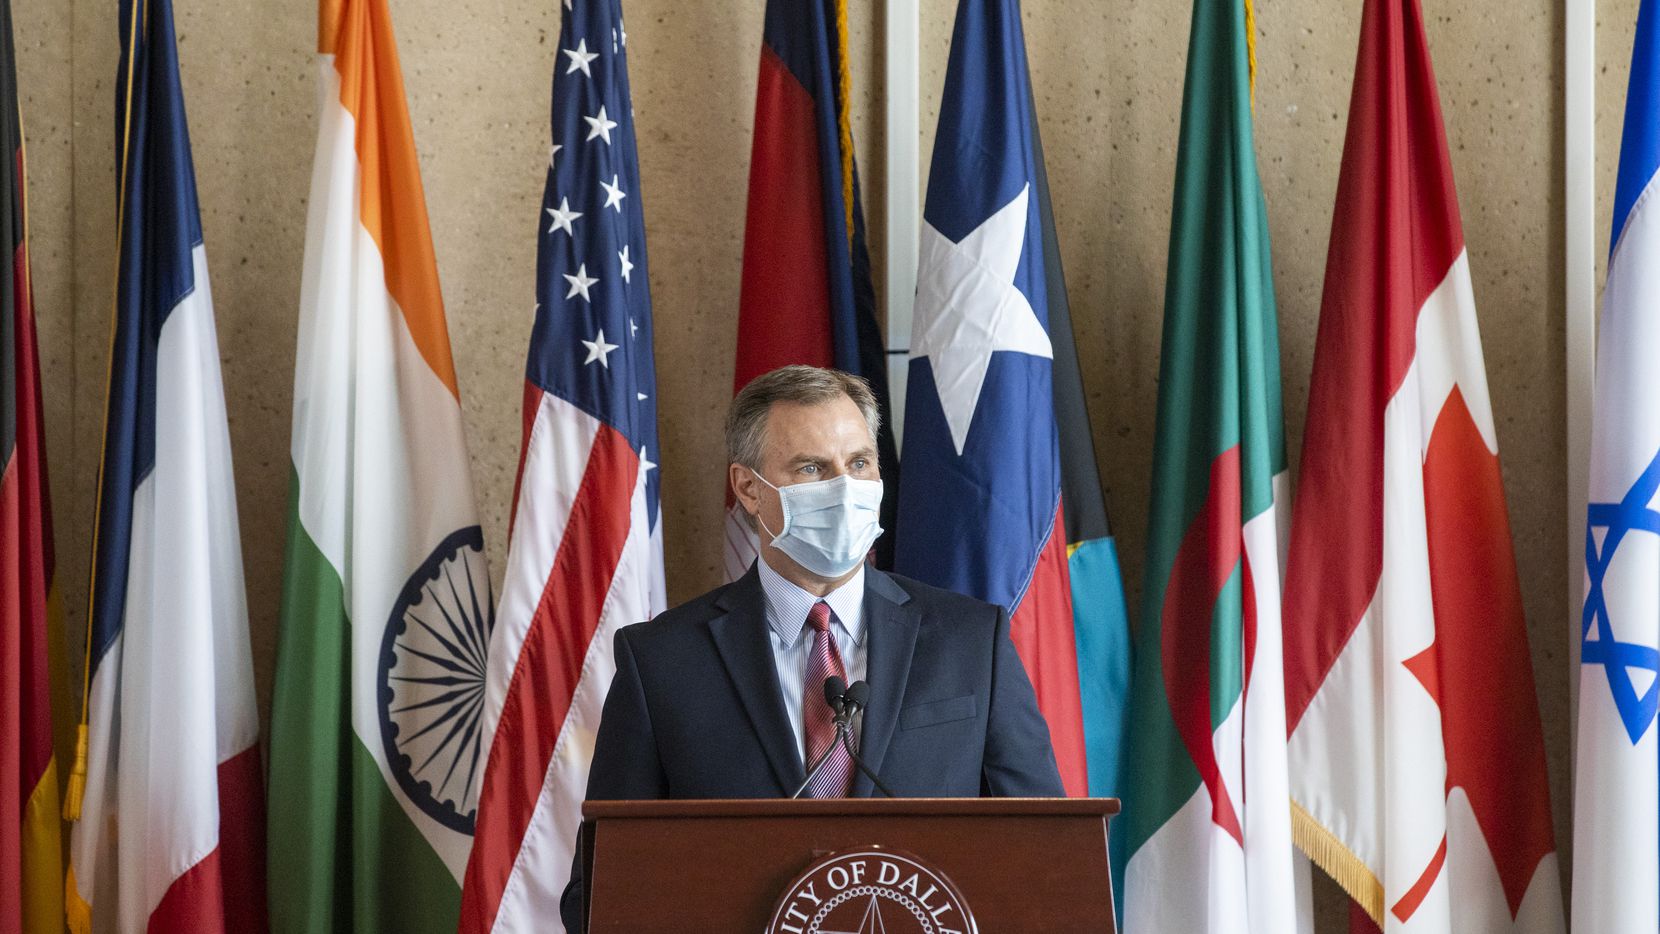 Assistant City Manager Jon Fortune speaks to reporters during a press conference at Dallas City Hall in Dallas on Tuesday, May 12, 2020.